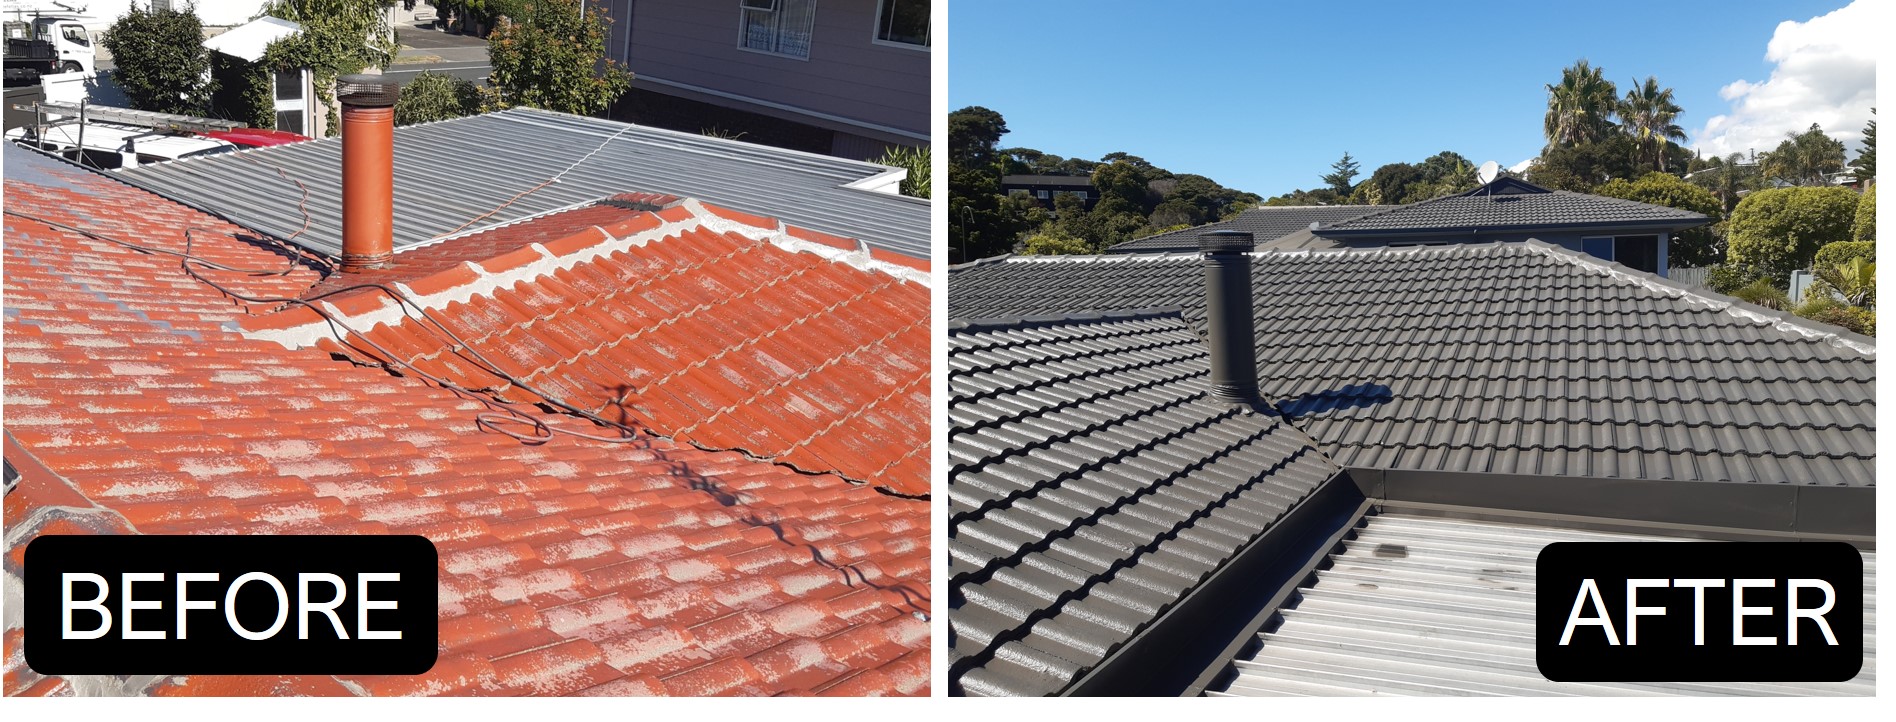 NZ Roofing specialist